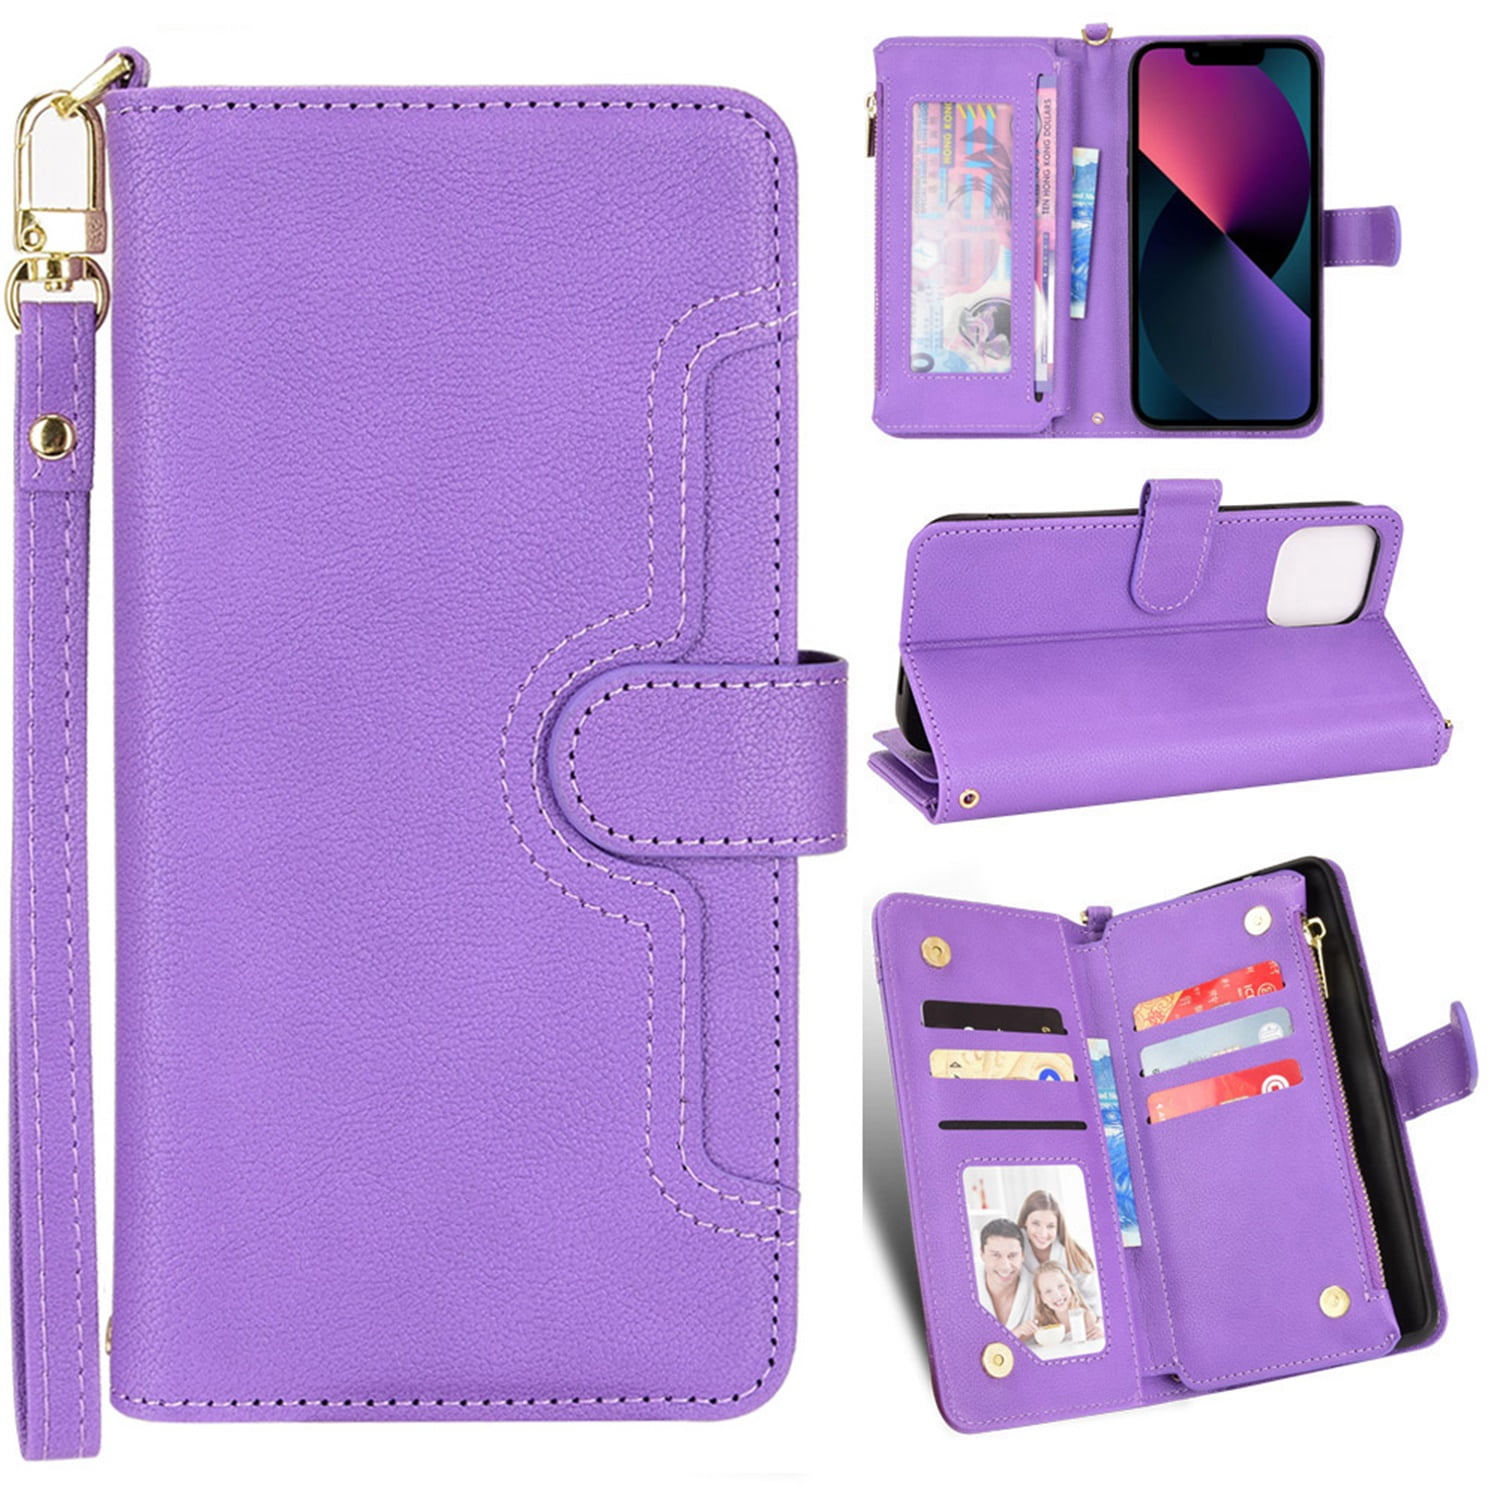 Allytech iPhone 14 Pro Max 6.7 Zipper Wallet Case with 6 Card Slots, [Wrist  Strap] [Shoulder Lanyard] Premium PU Leather Flip Stand Protective Case for  Apple iPhone 14 Pro Max 5G 2022, Purple 